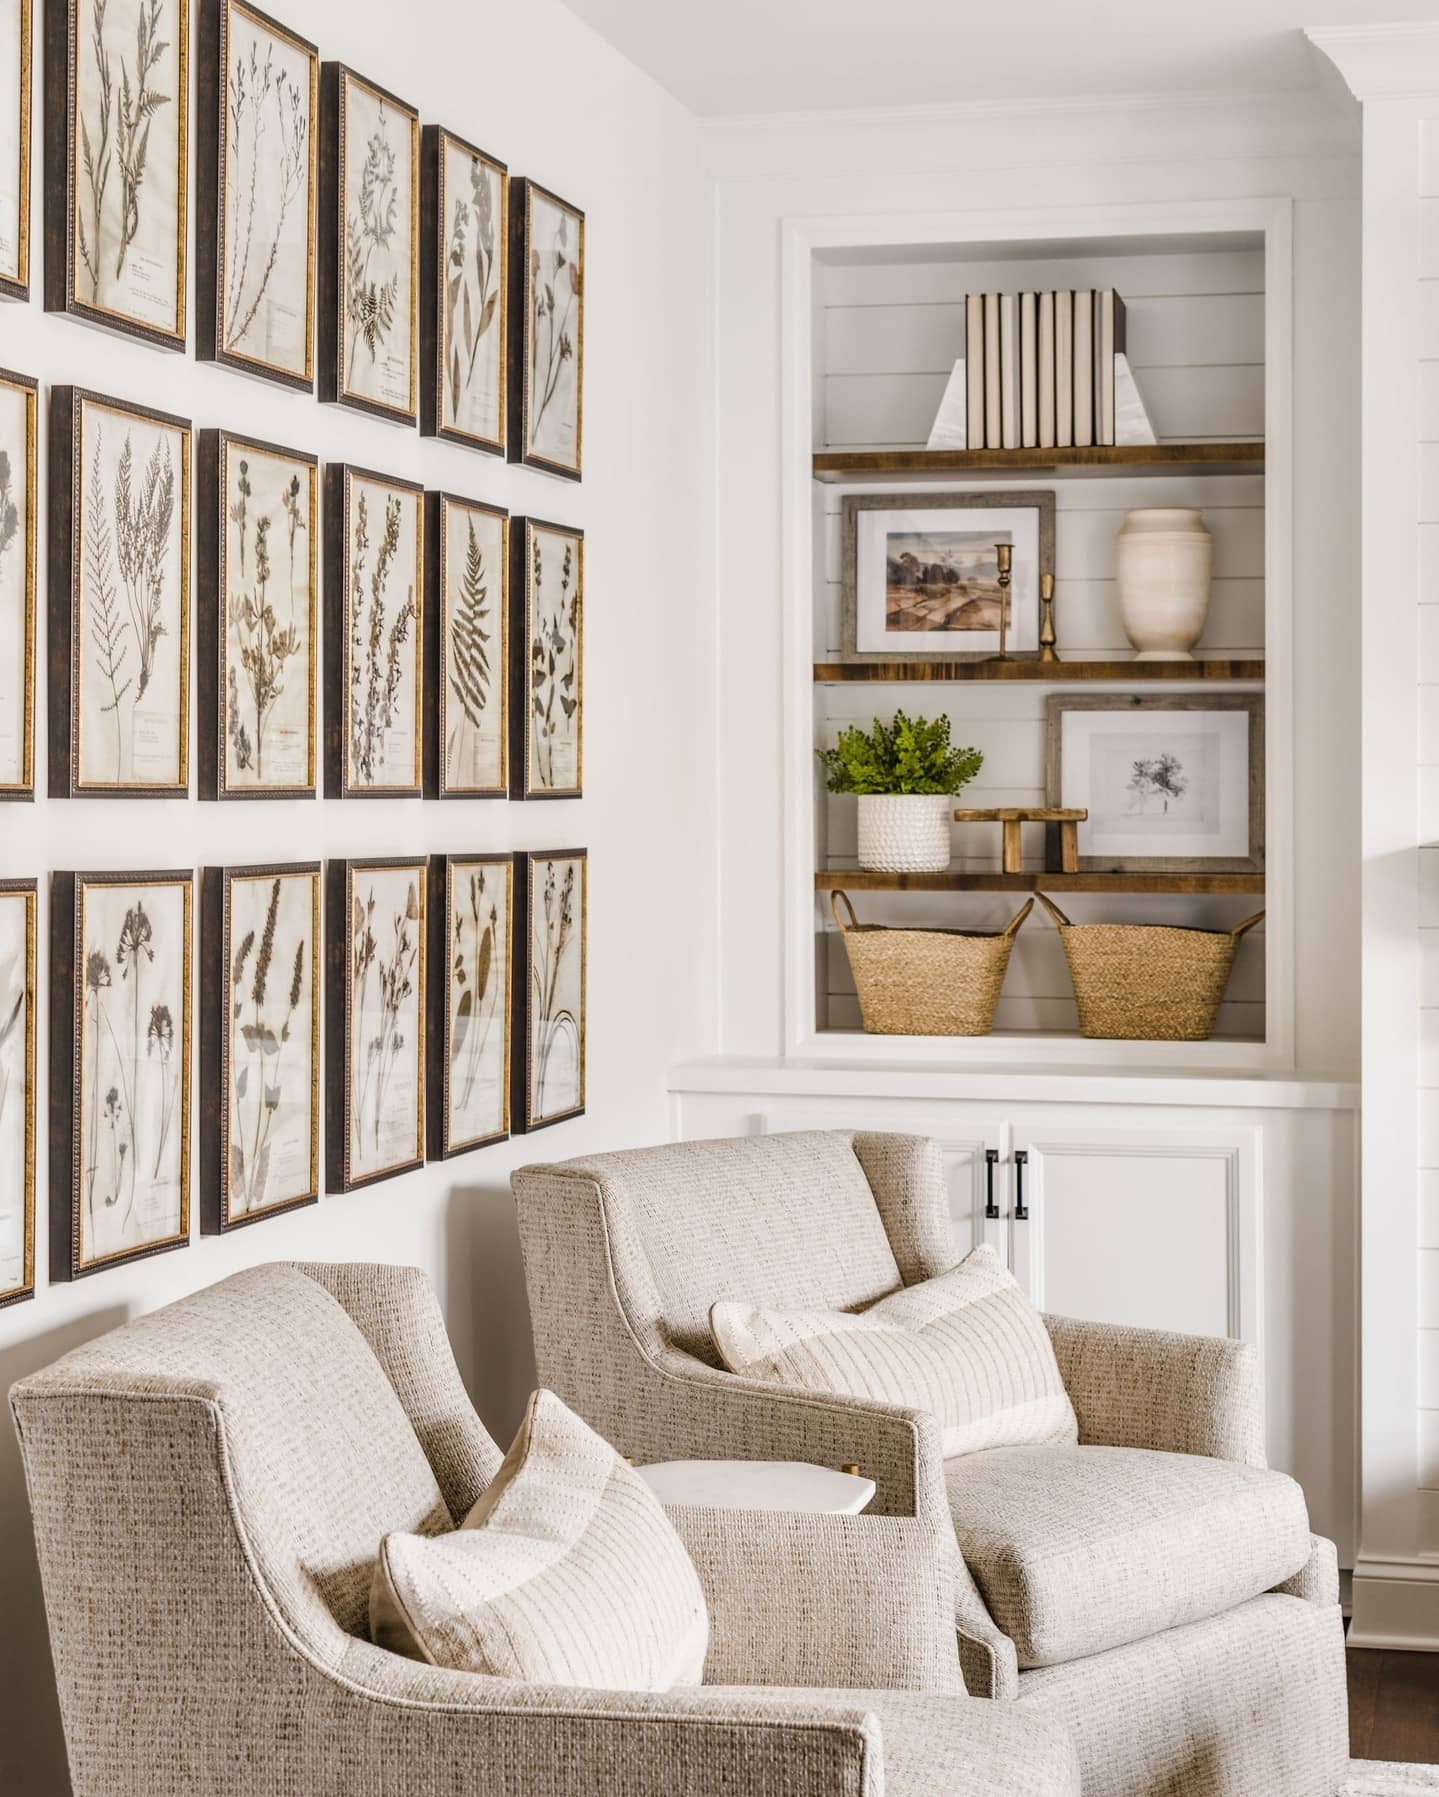 how to make your home look expensive on a budget idea - symmetrical gallery wall wth botanical prints